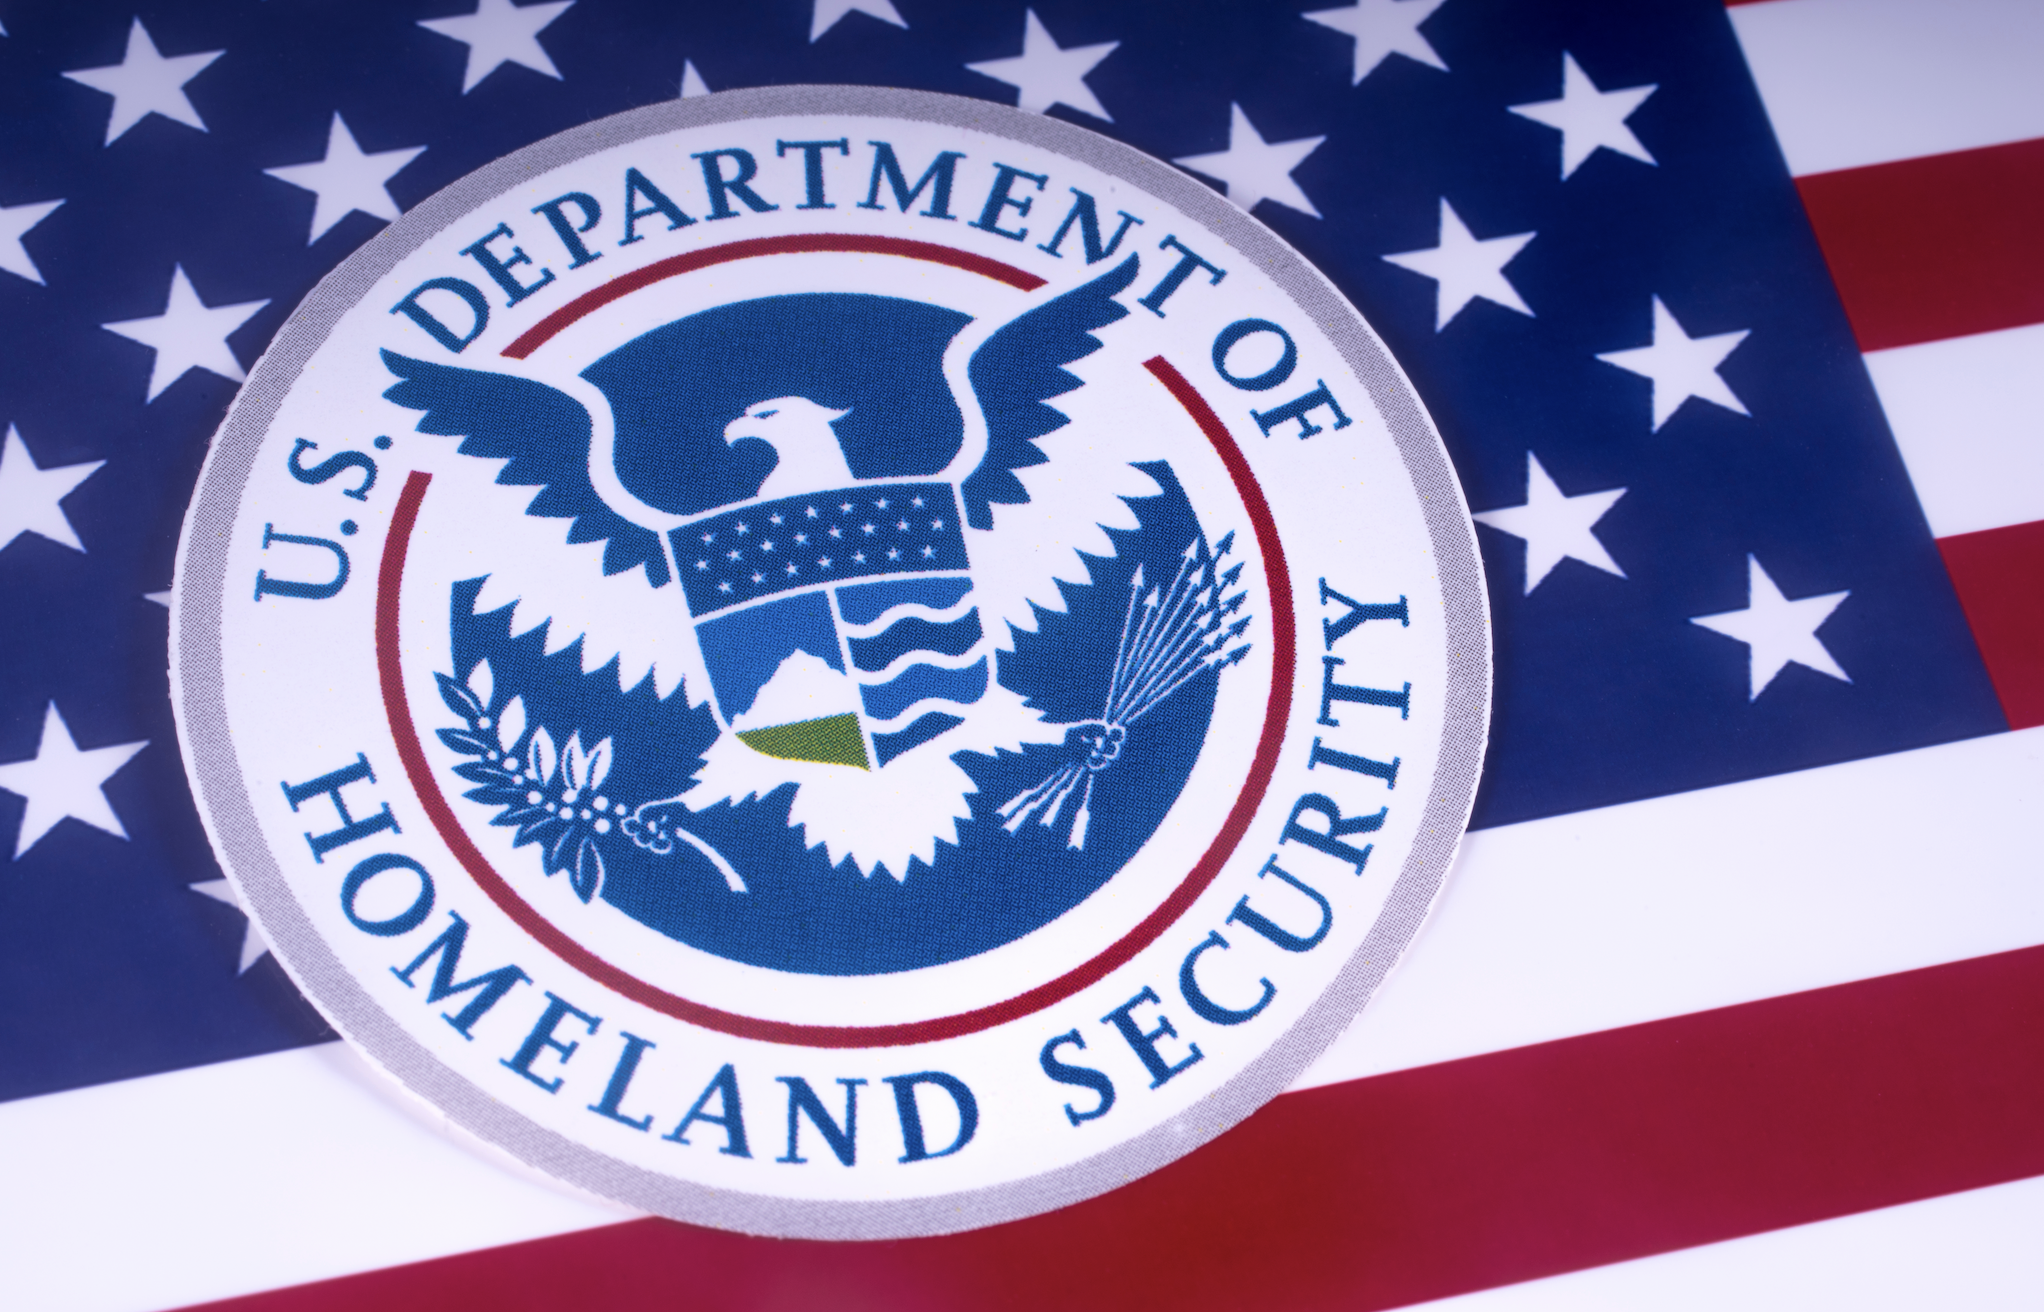 Image of the U.S. Department of Homeland Security Seal